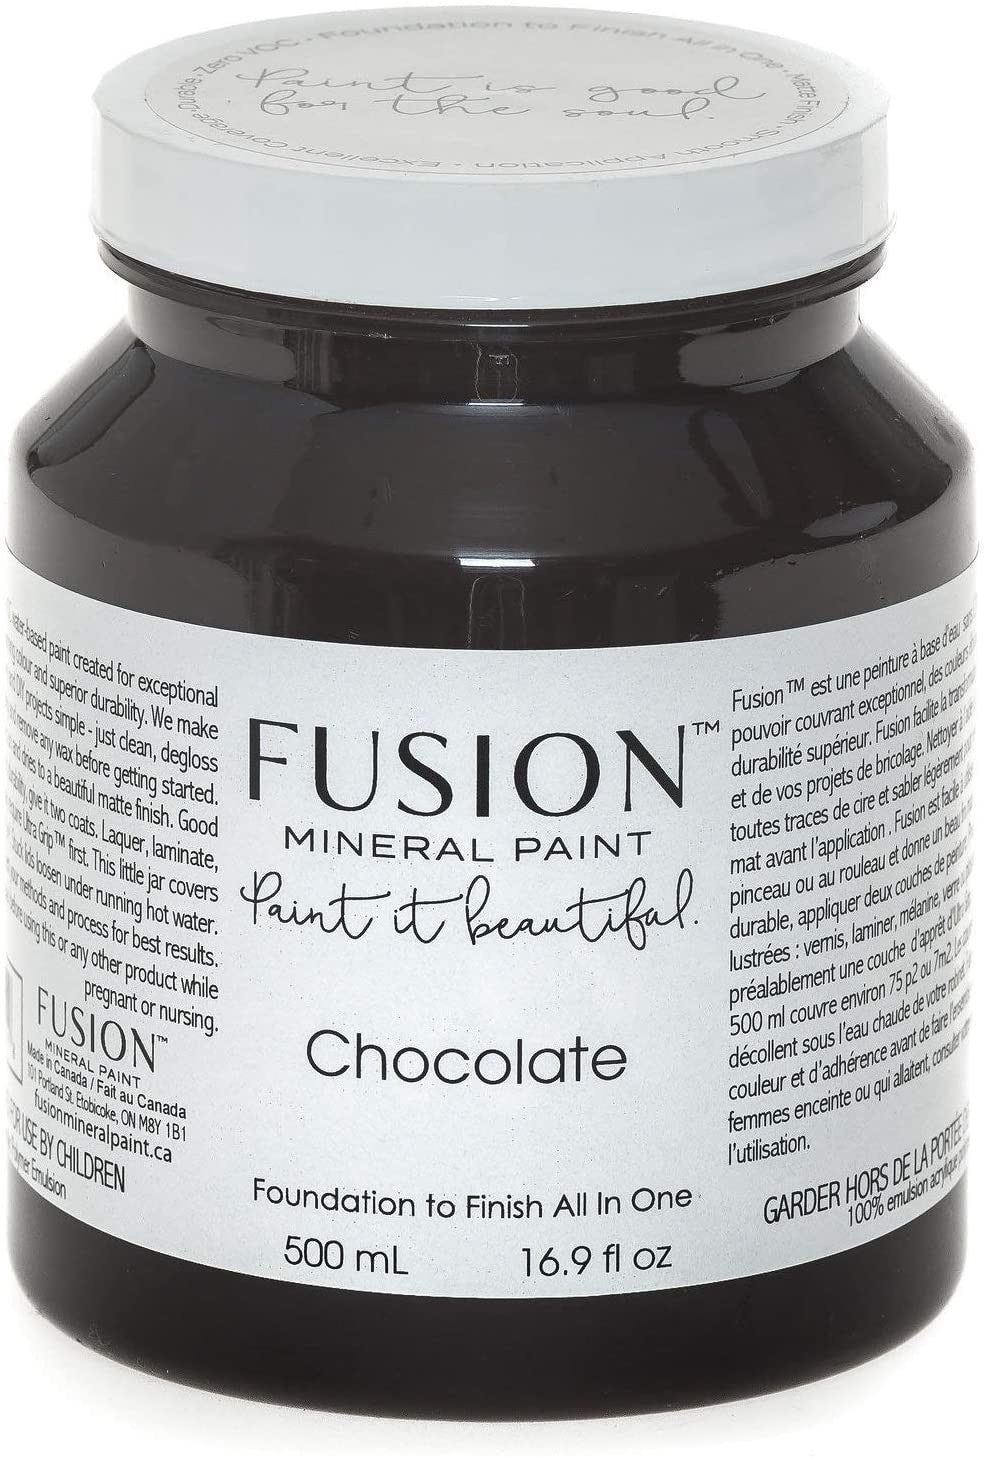 Chocolate by Fusion